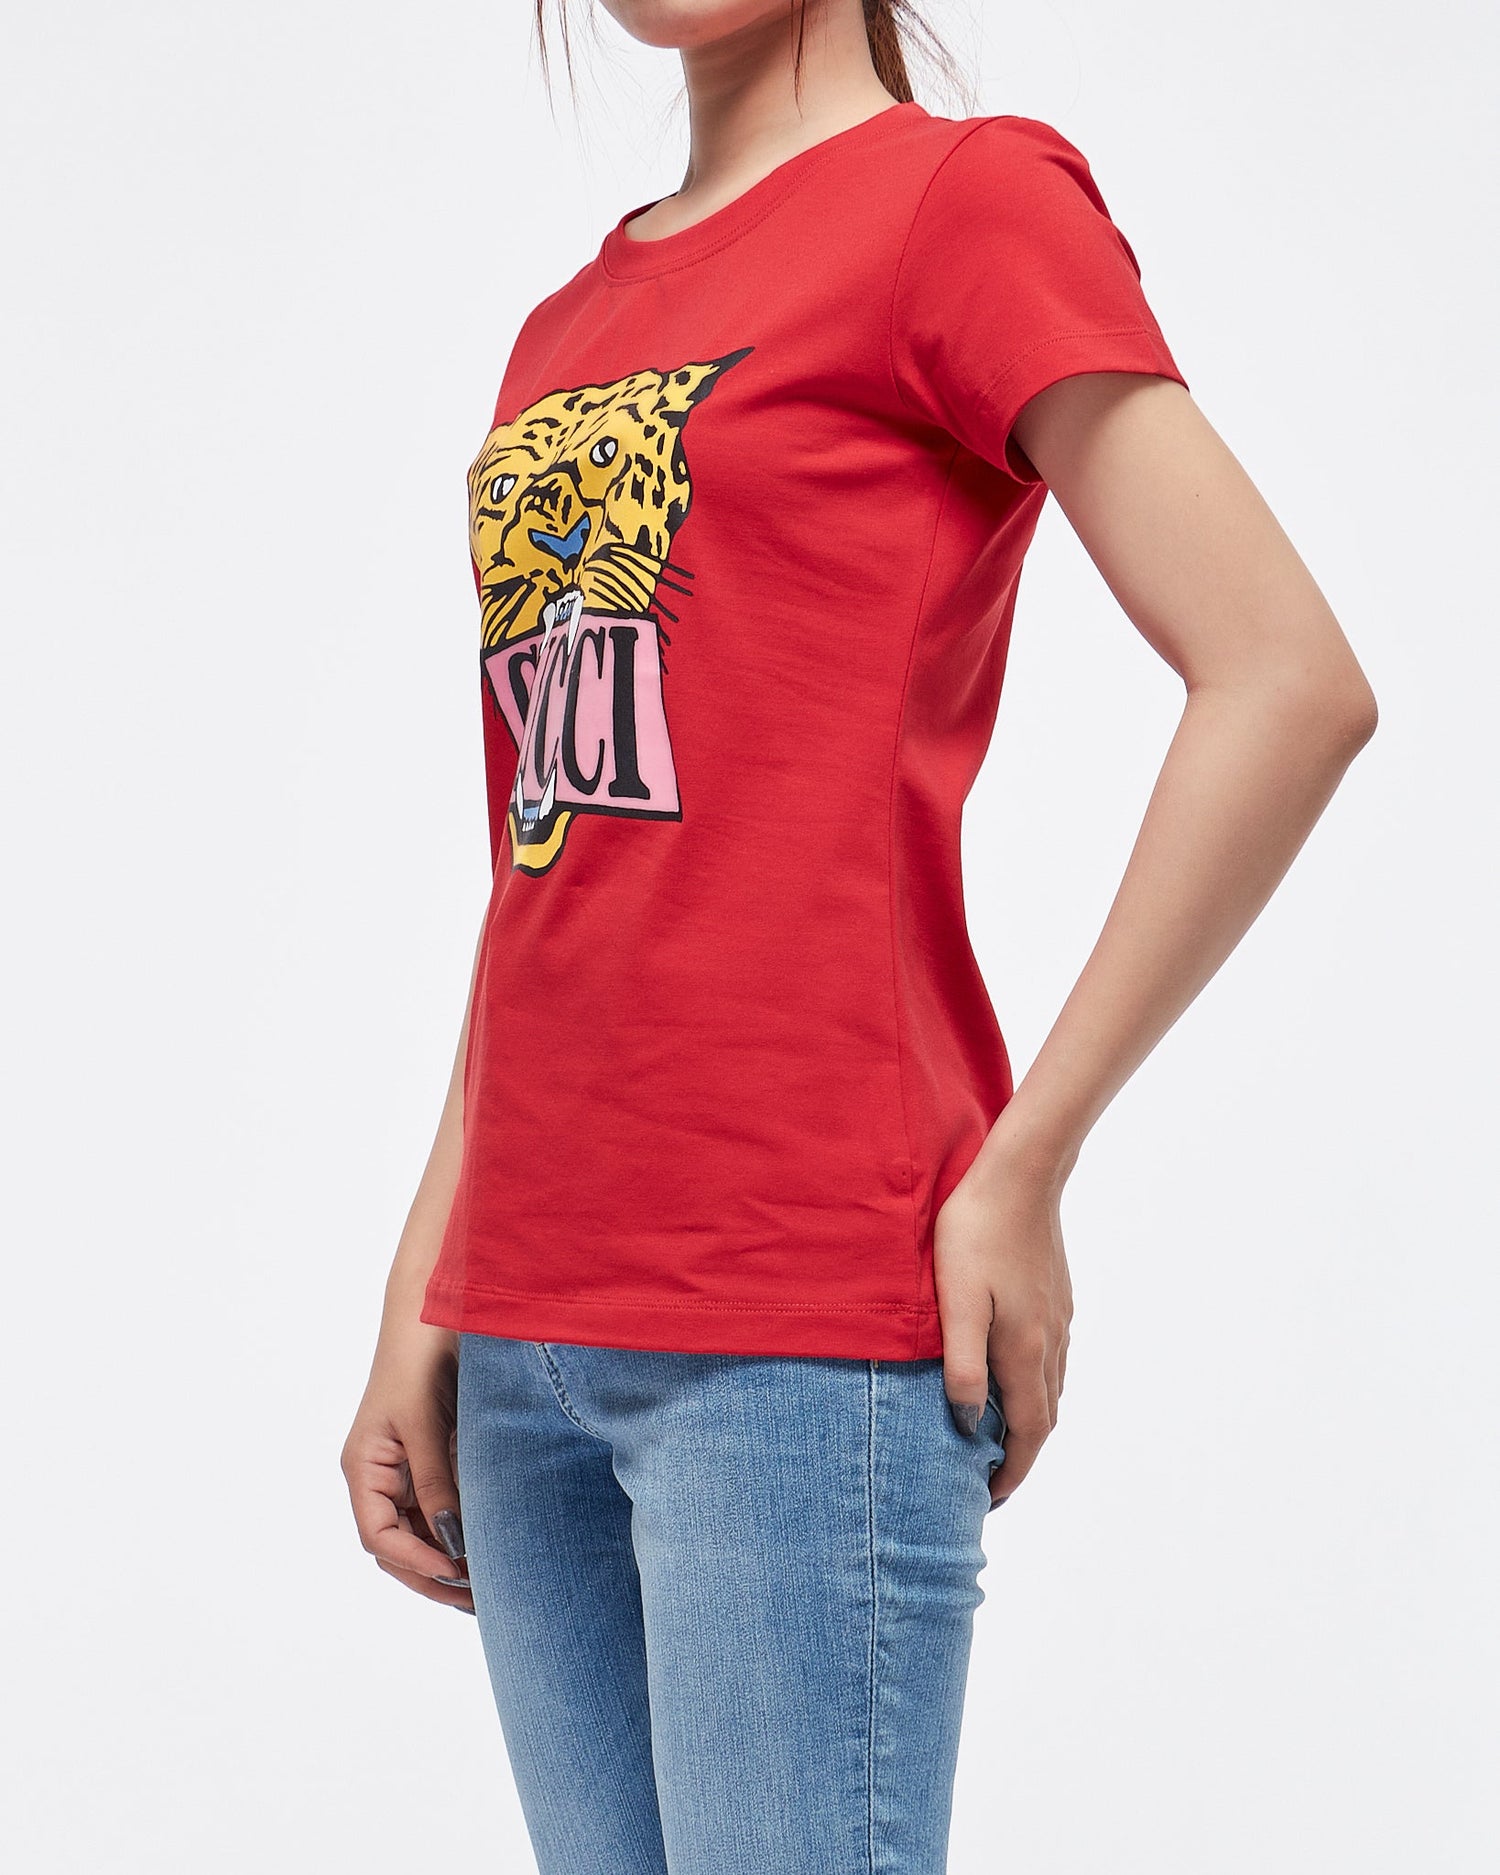 MOI OUTFIT-Tiger Logo Printed Lady T-Shirt 14.50